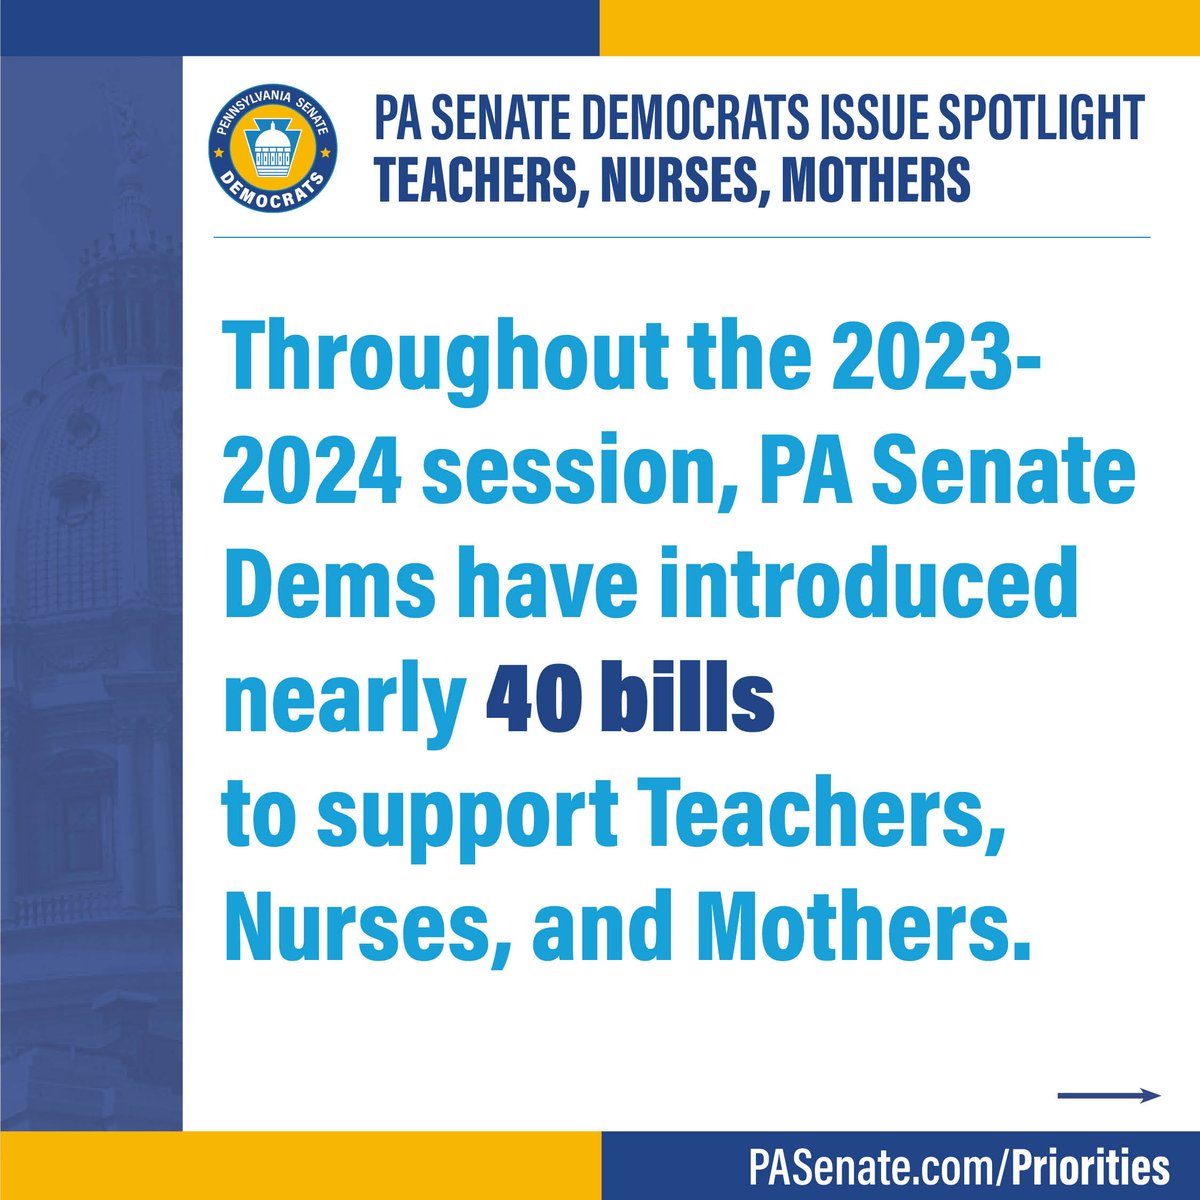 Throughout the 2023-2024 session, we have introduced nearly 40 bills to support Pennsylvania's teachers, nurses and mothers. Our bills seek to improve working conditions, prohibit discrimination, increase salaries and much more. Find out more at PASenate.com/Priorities